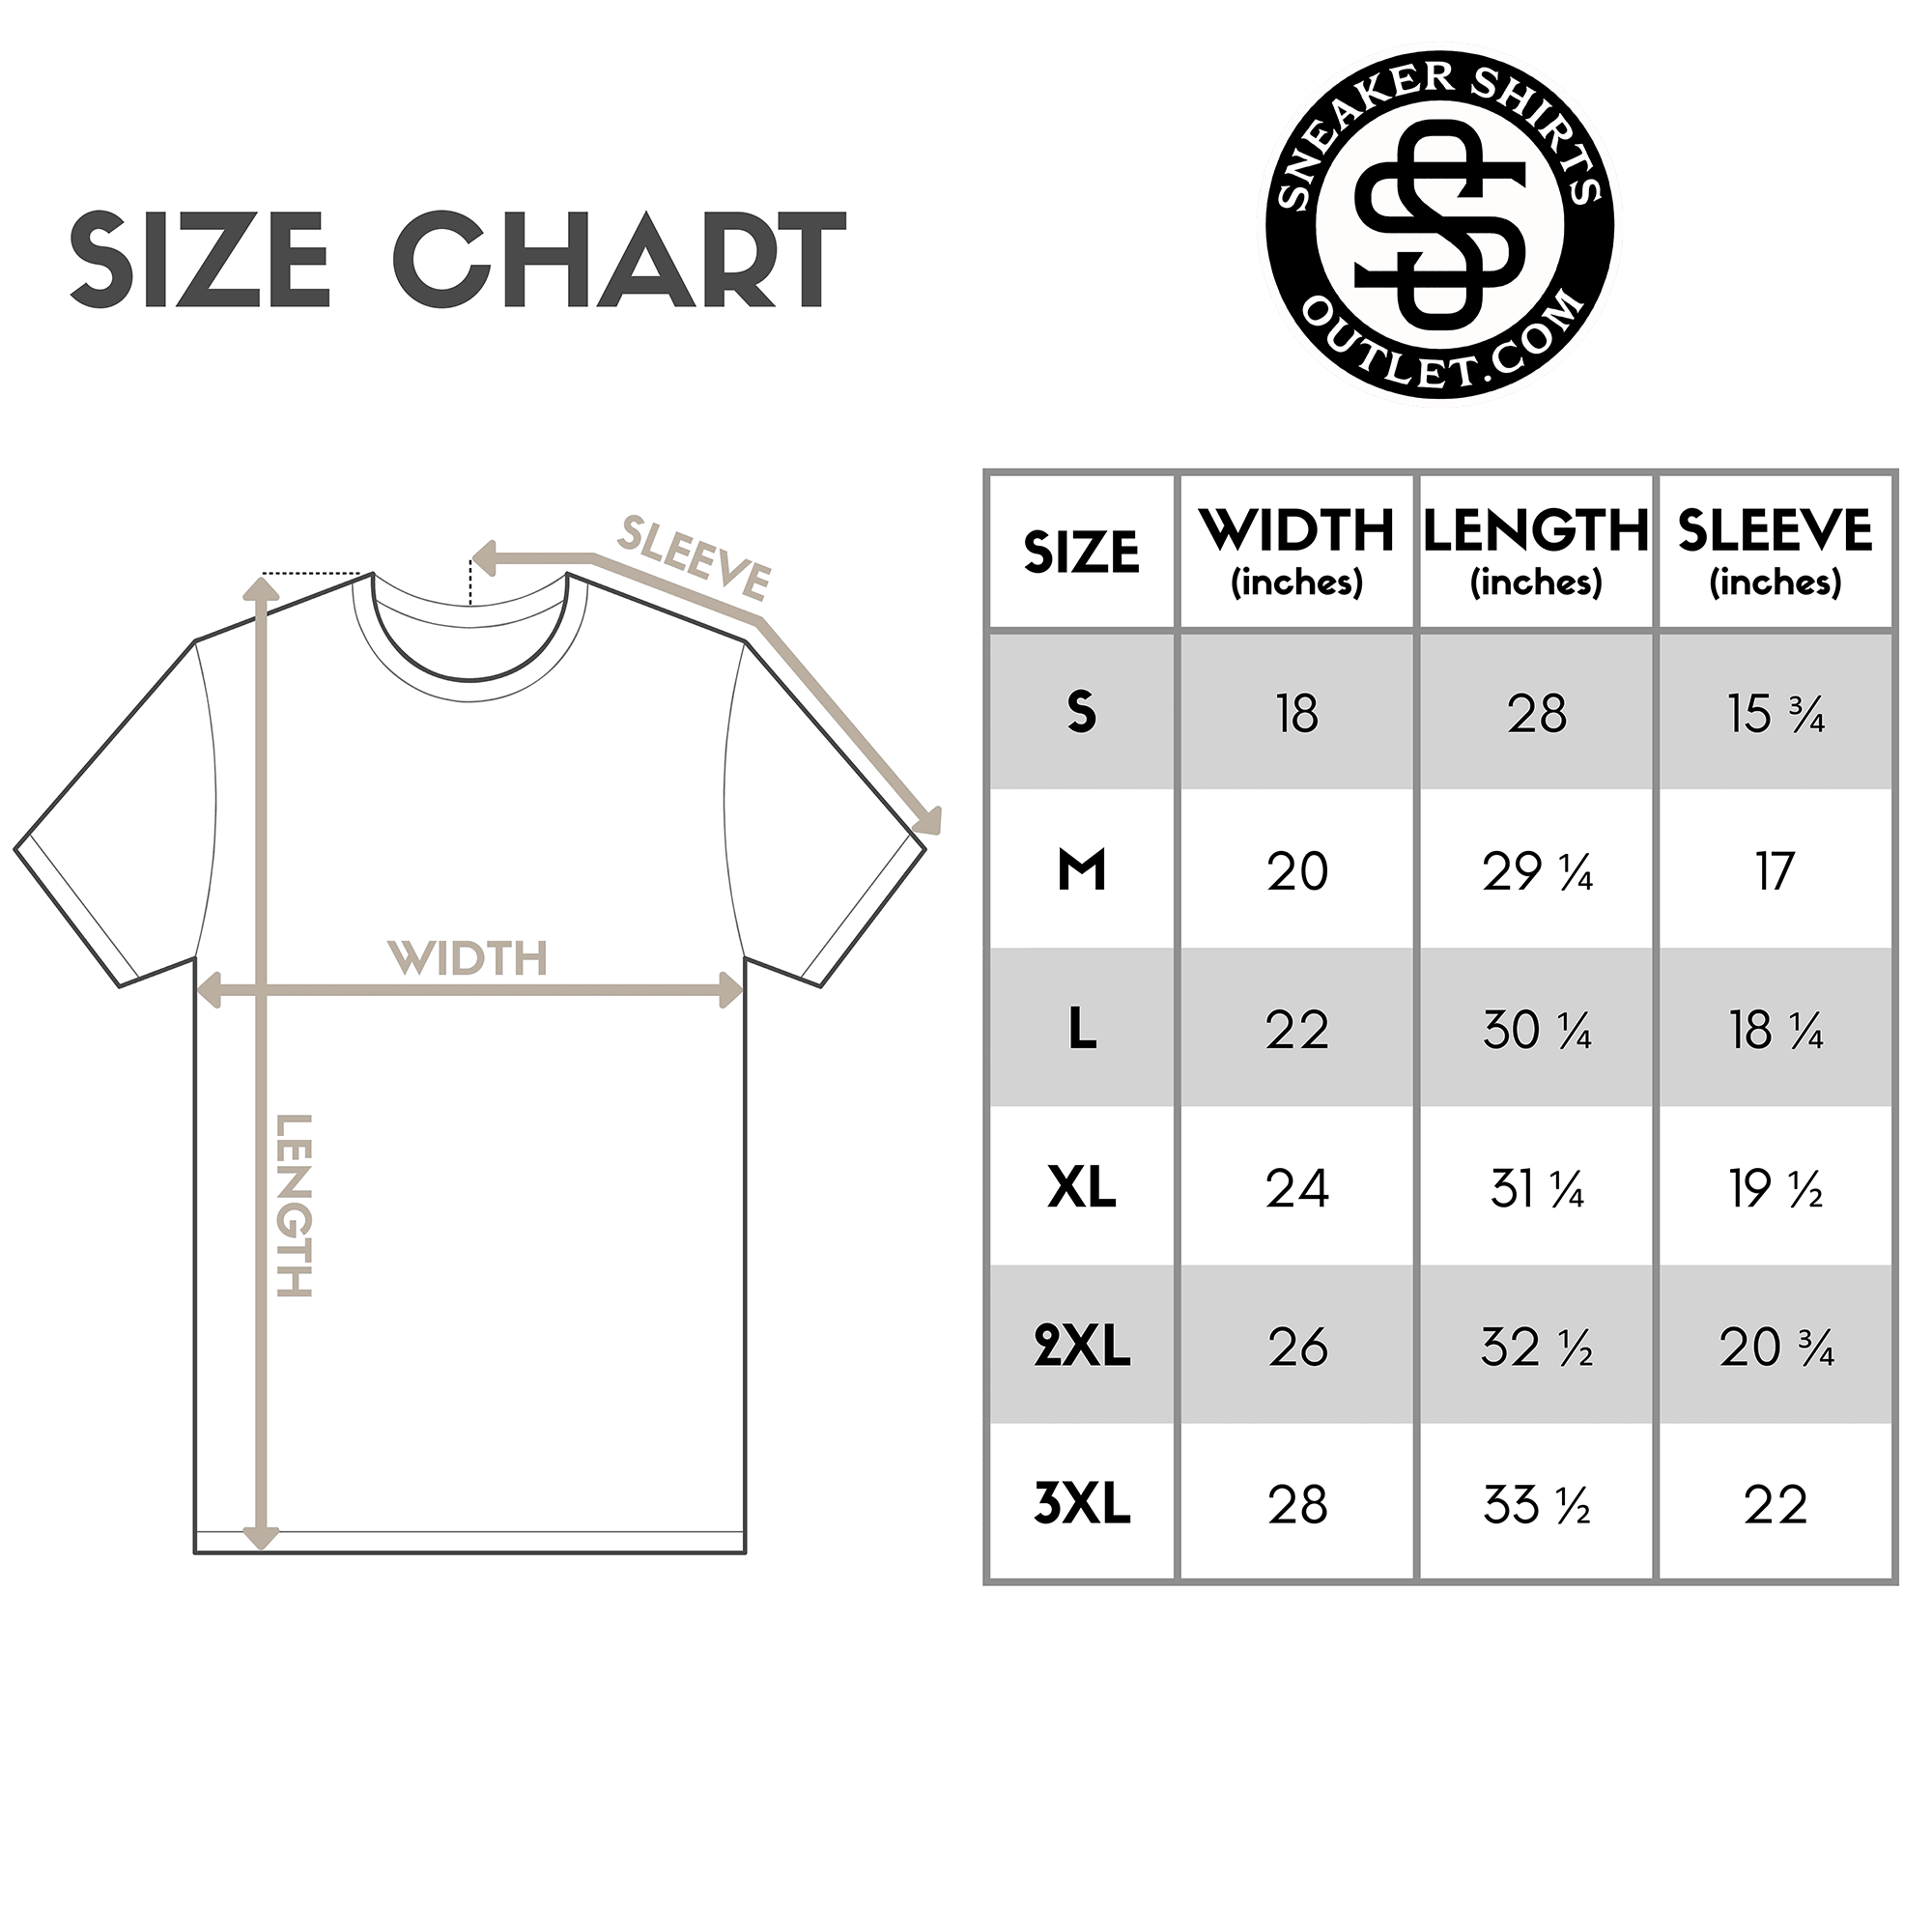 Bred Respect The Hustle Shirt by Dope Star Clothing® size chart photo